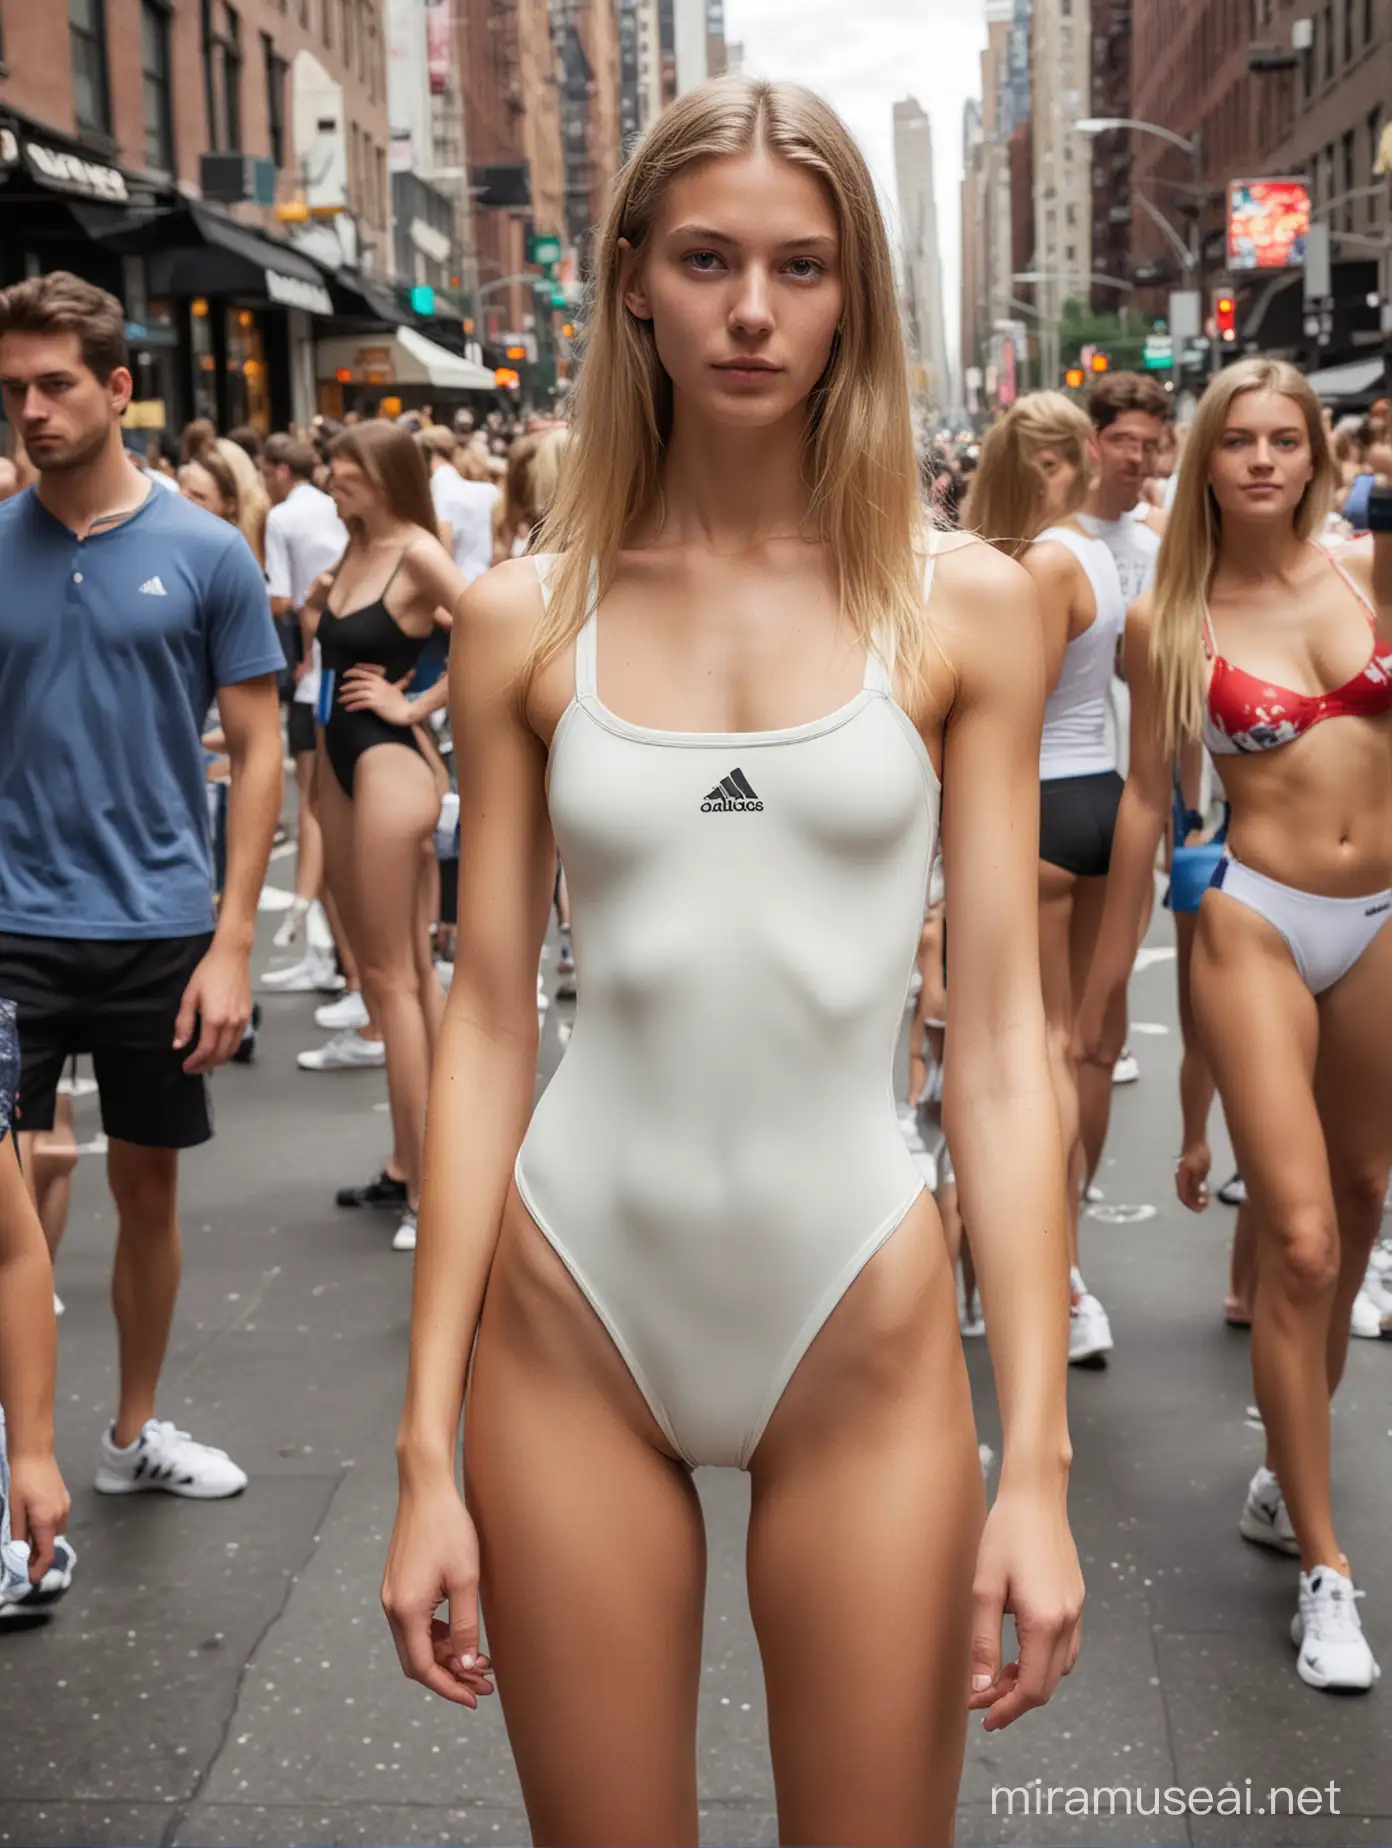 Stylish Nordic Woman in Adidas Swimsuit amidst New York City Bustle